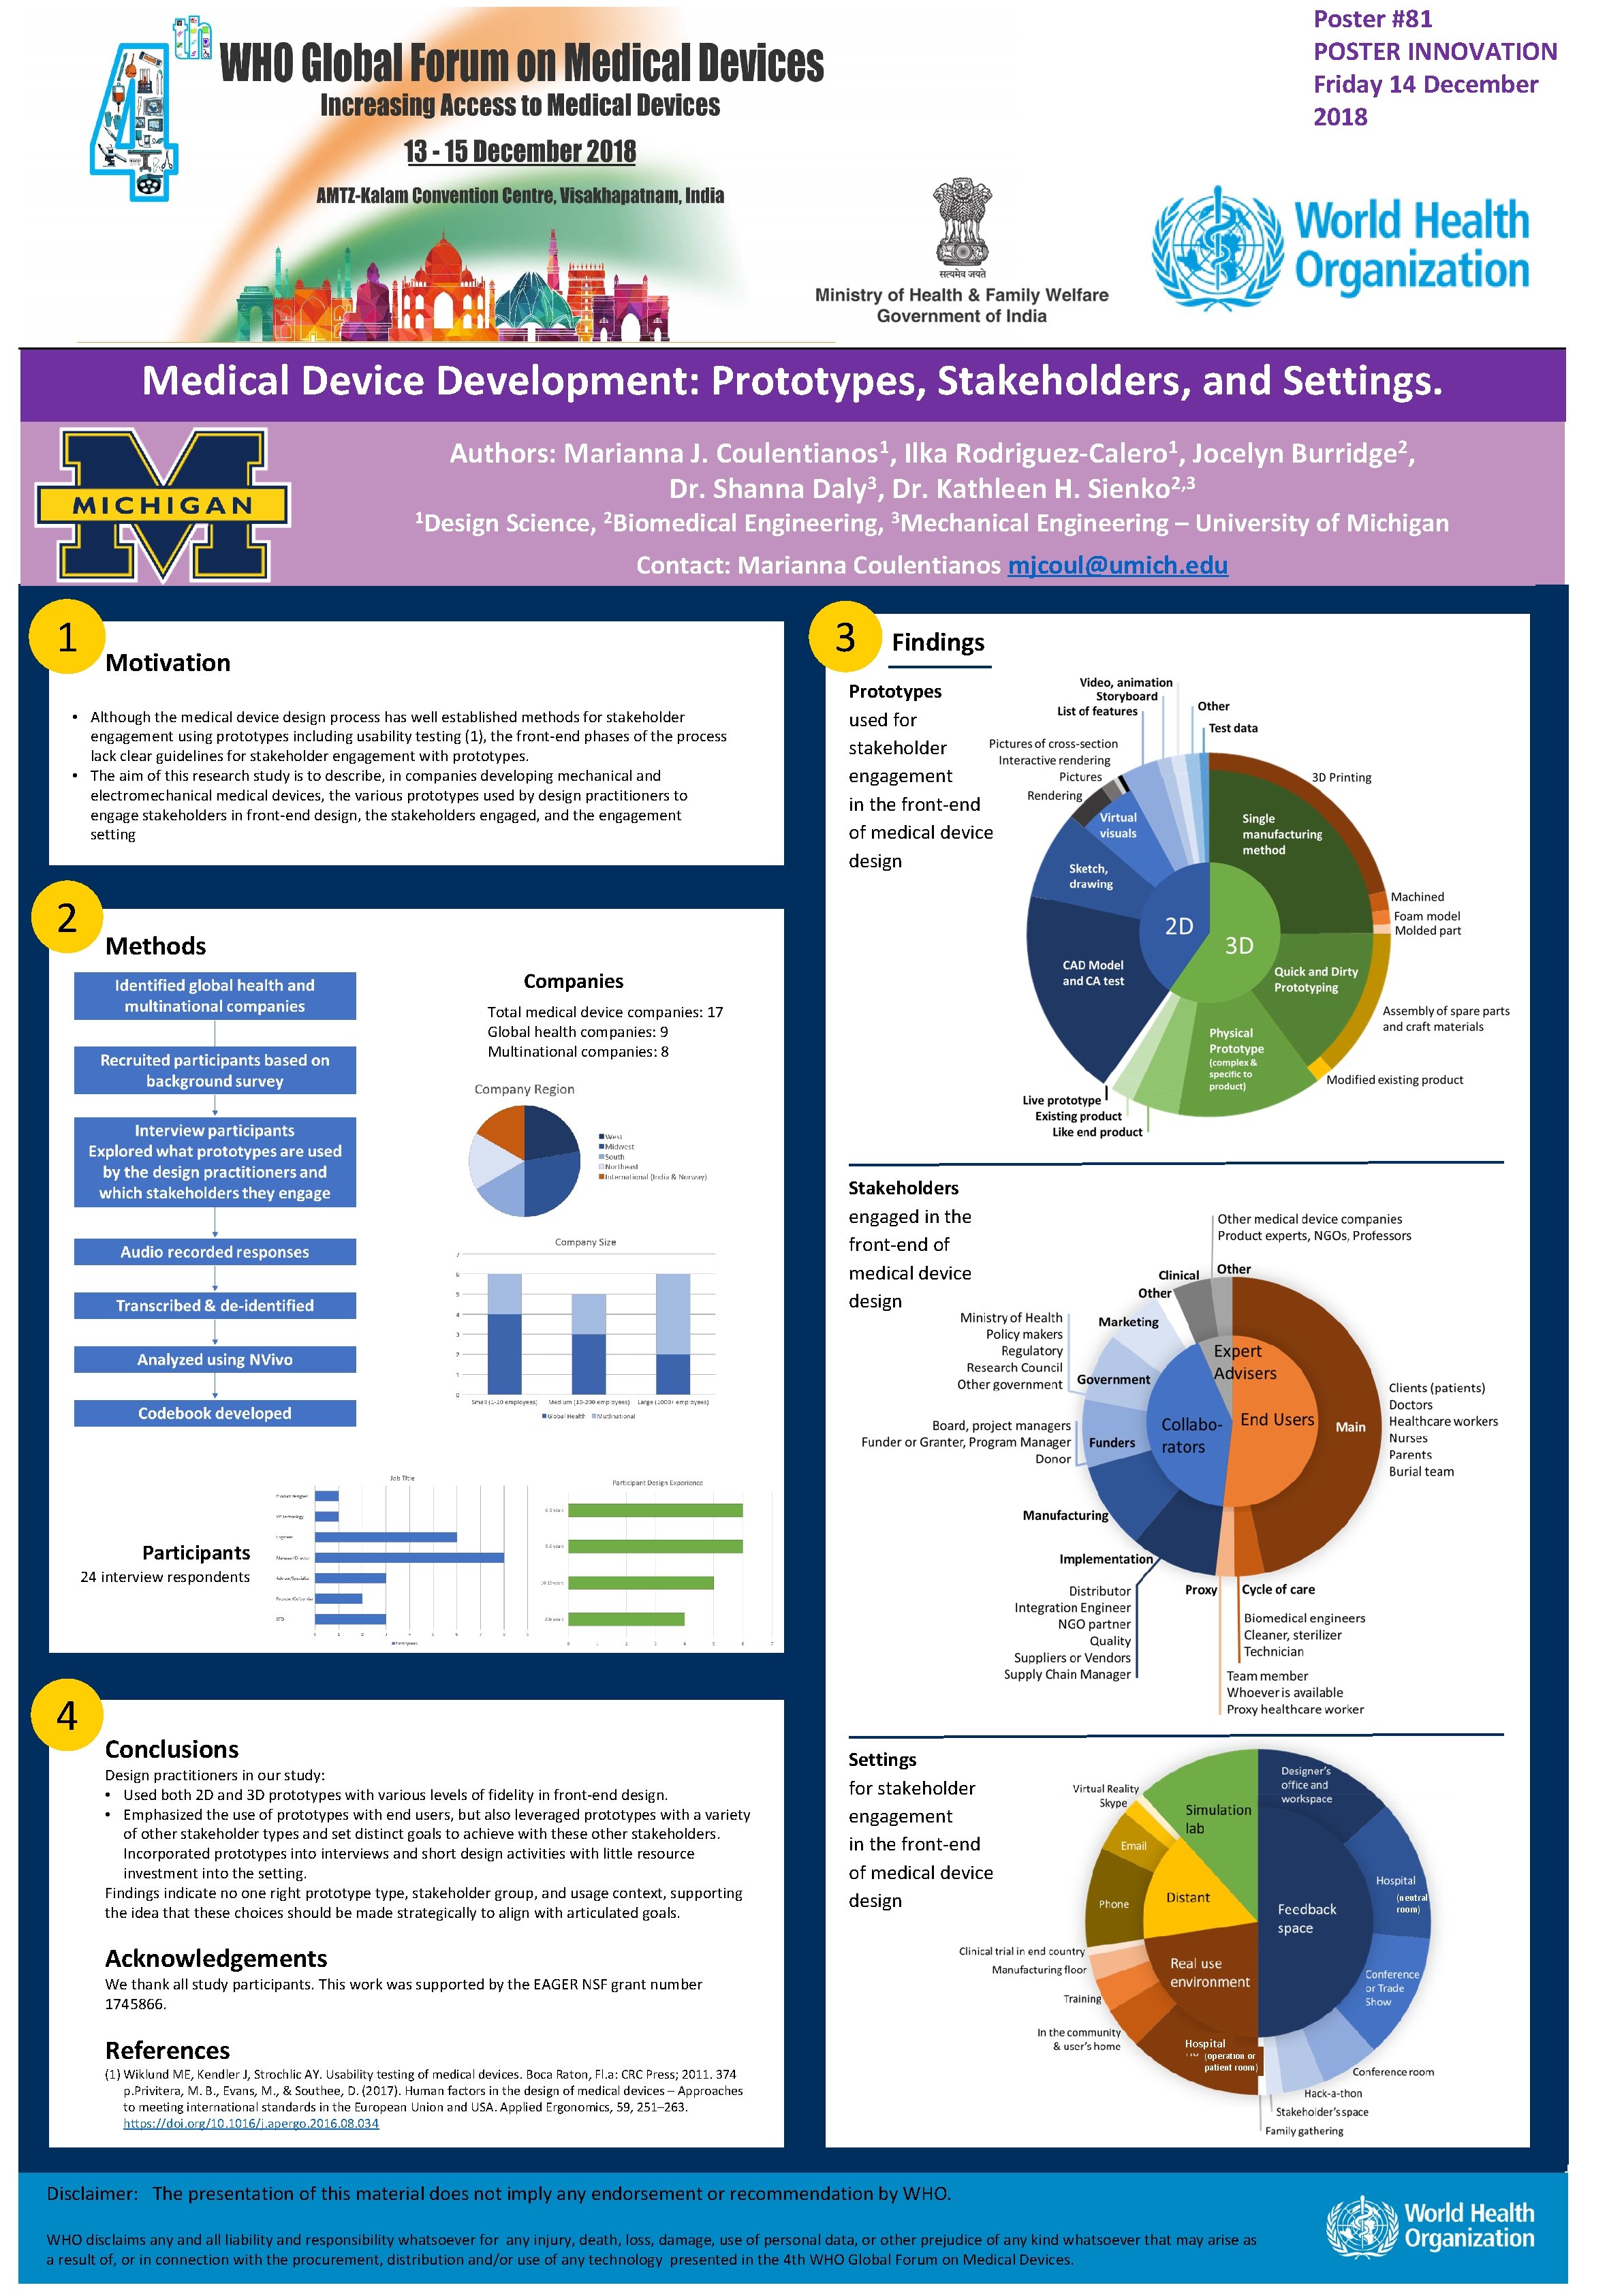 Poster #81 POSTER INNOVATION Friday 14 December 2018 Medical Device Development: Prototypes, Stakeholders, and